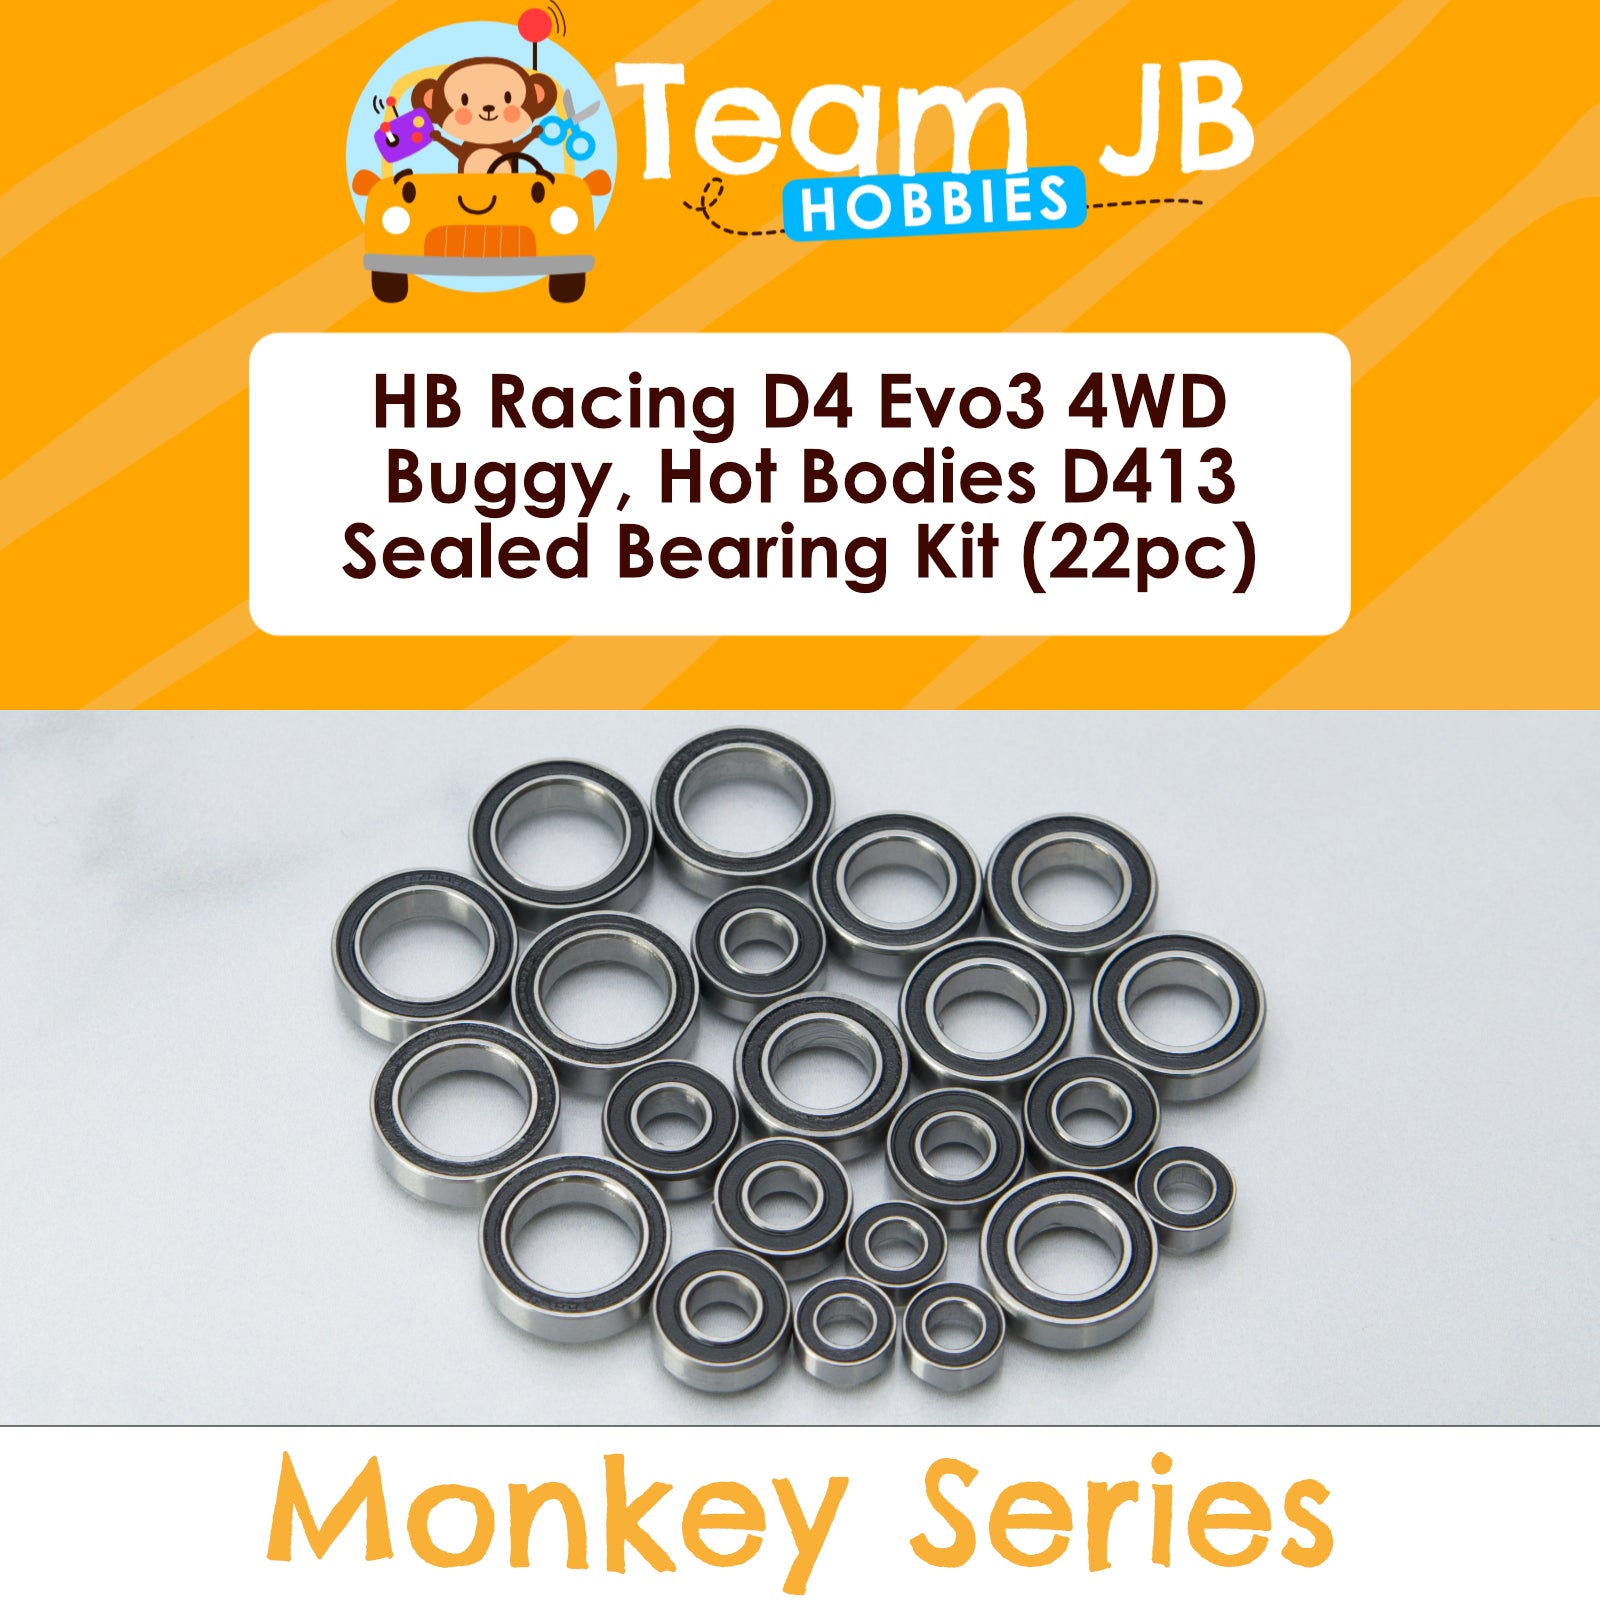 HB Racing D4 Evo3 4WD Buggy, Hot Bodies D413 - Sealed Bearing Kit